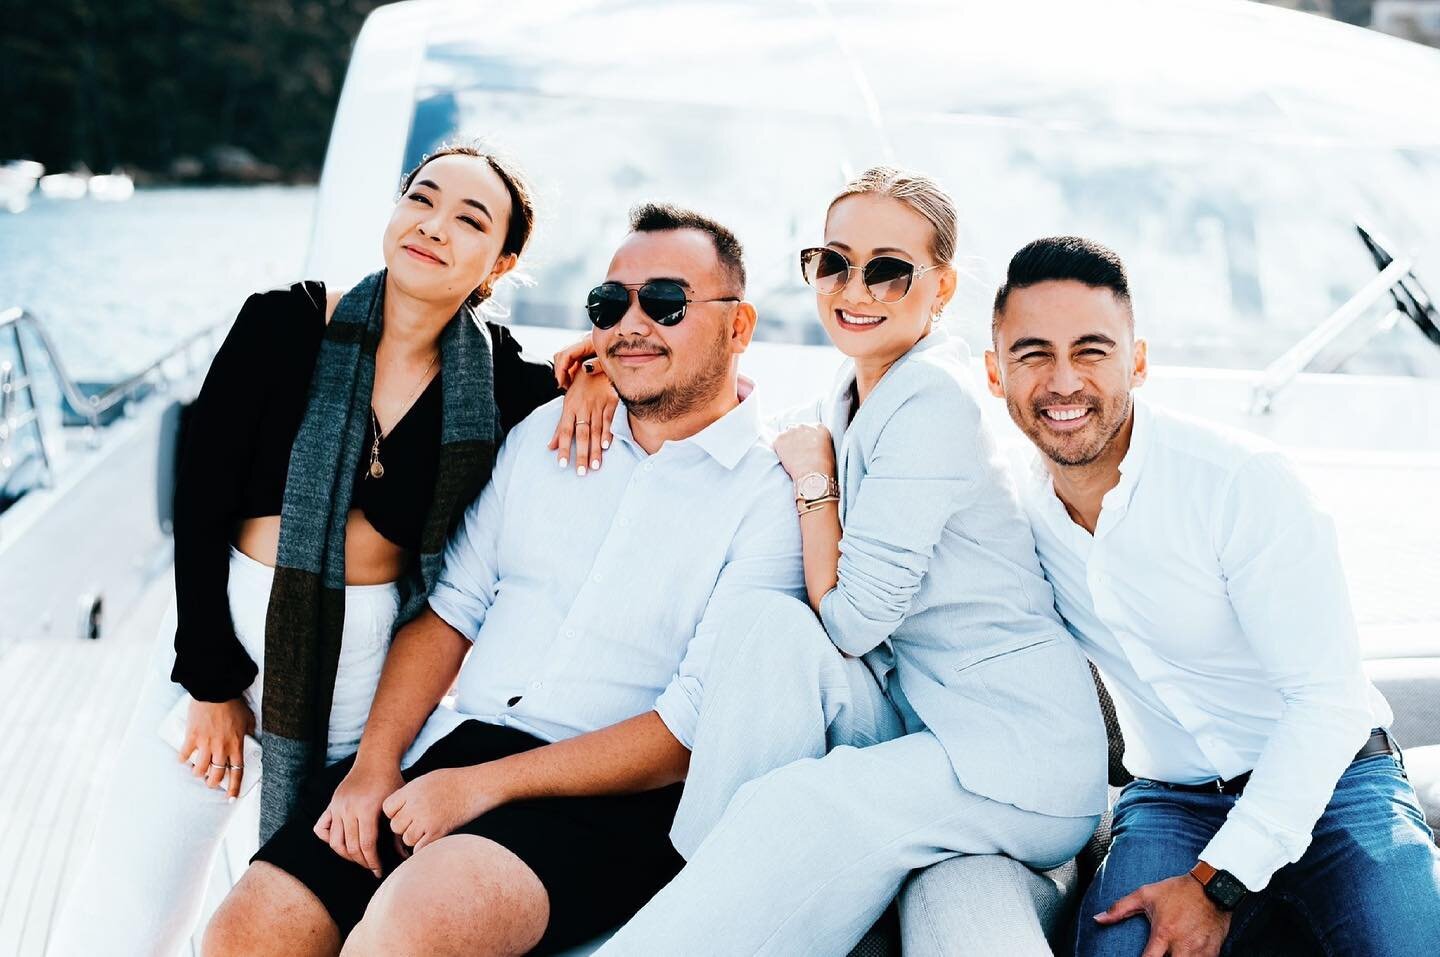 We are the faces of AHC 🥂
.
.
.
.
.
#ahclawyers #immigrationlawfirm 
#weekendvibes #livingourbestlife #bookingsavailable #pleasecallus 😂 #yachtlife